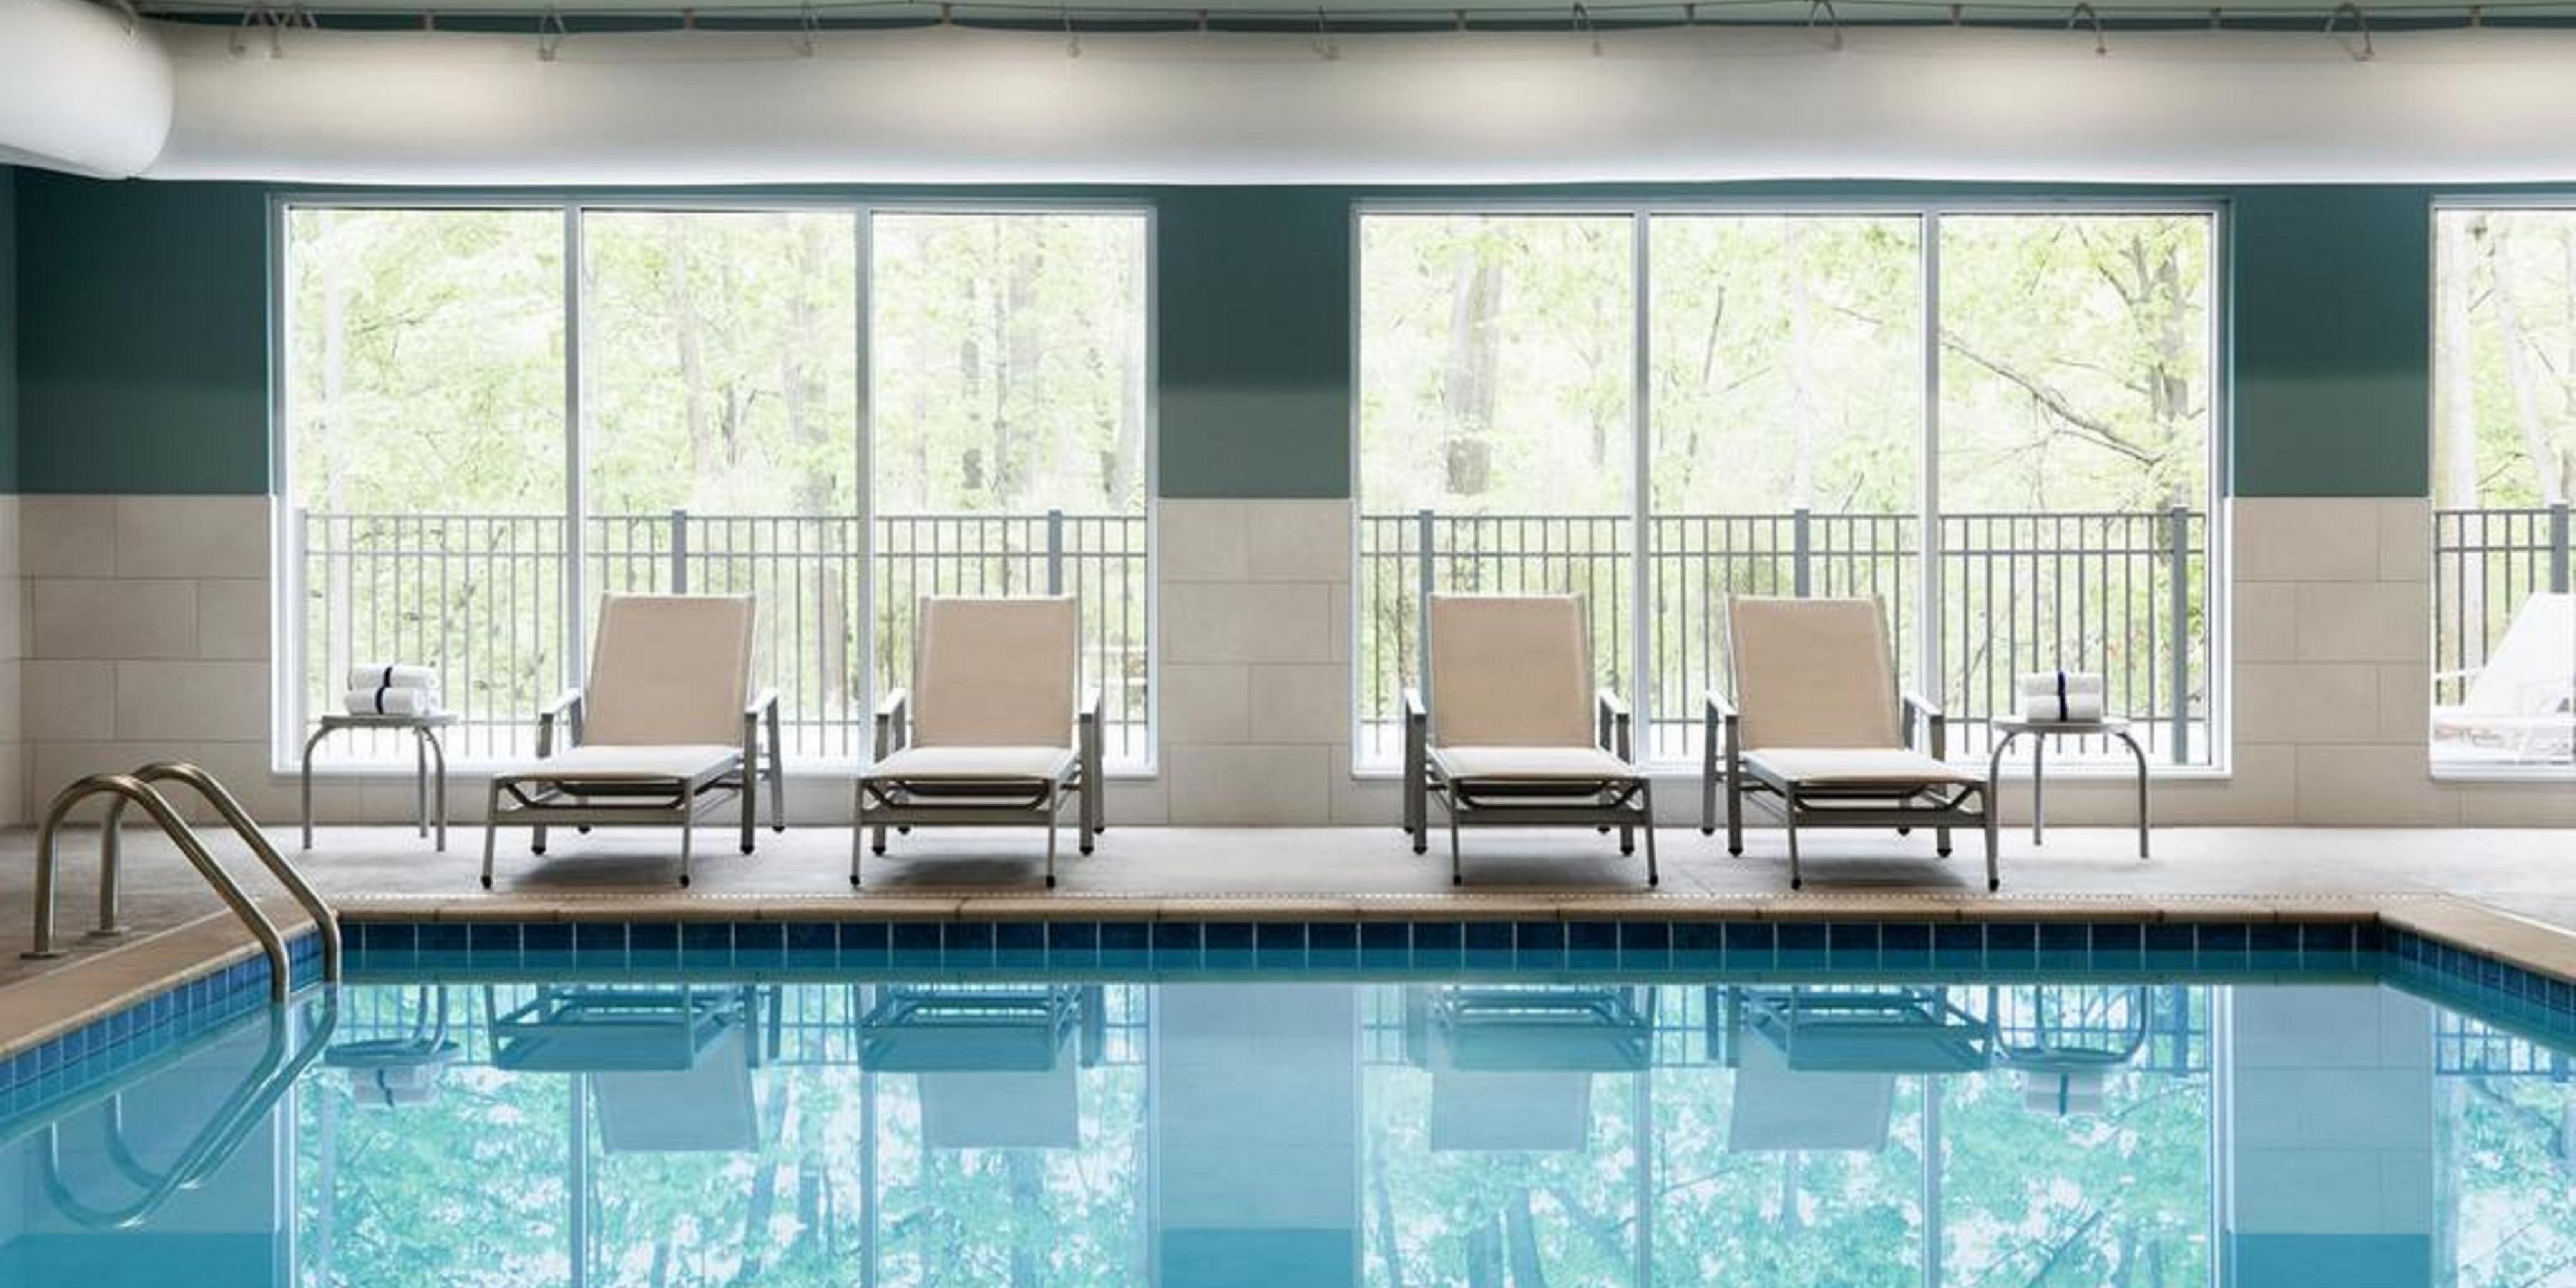 Take a refreshing dip in the morning or relax later in our heated indoor pool, open daily between 8am to 10pm. Stay active in our Fitness Center equipped with a treadmill, elliptical, stationary bicycle, free weights, towels, and flat-screen TVs, open between 5am to 11pm. All amenities are open during our renovation.